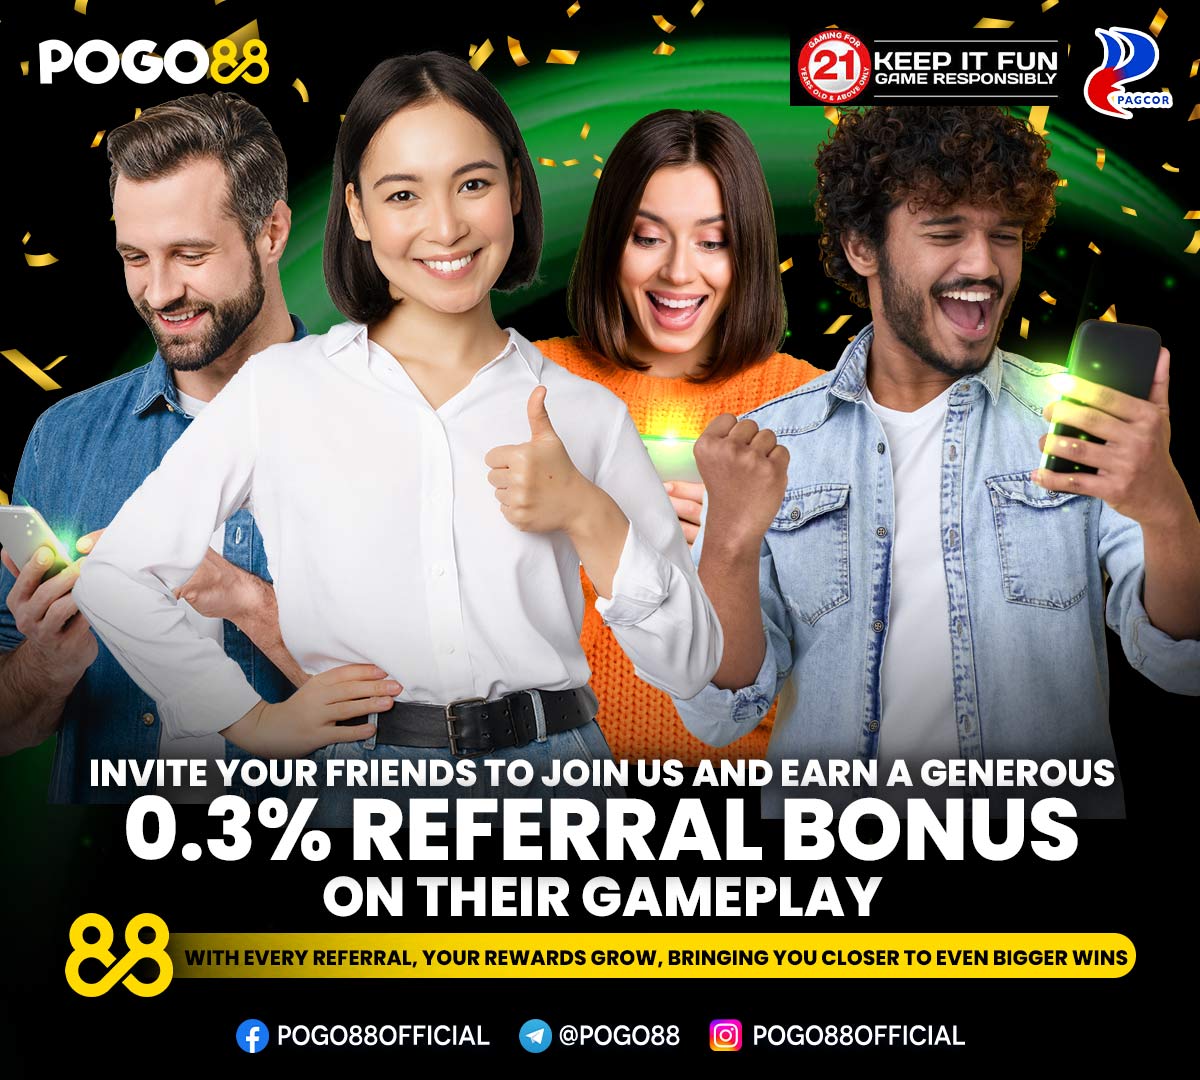 With every referral, your rewards grow, bringing you closer to even bigger wins. Start spreading the fun and watch your bonuses multiply
#POGO88 #ReferralRewards #RegisterNow